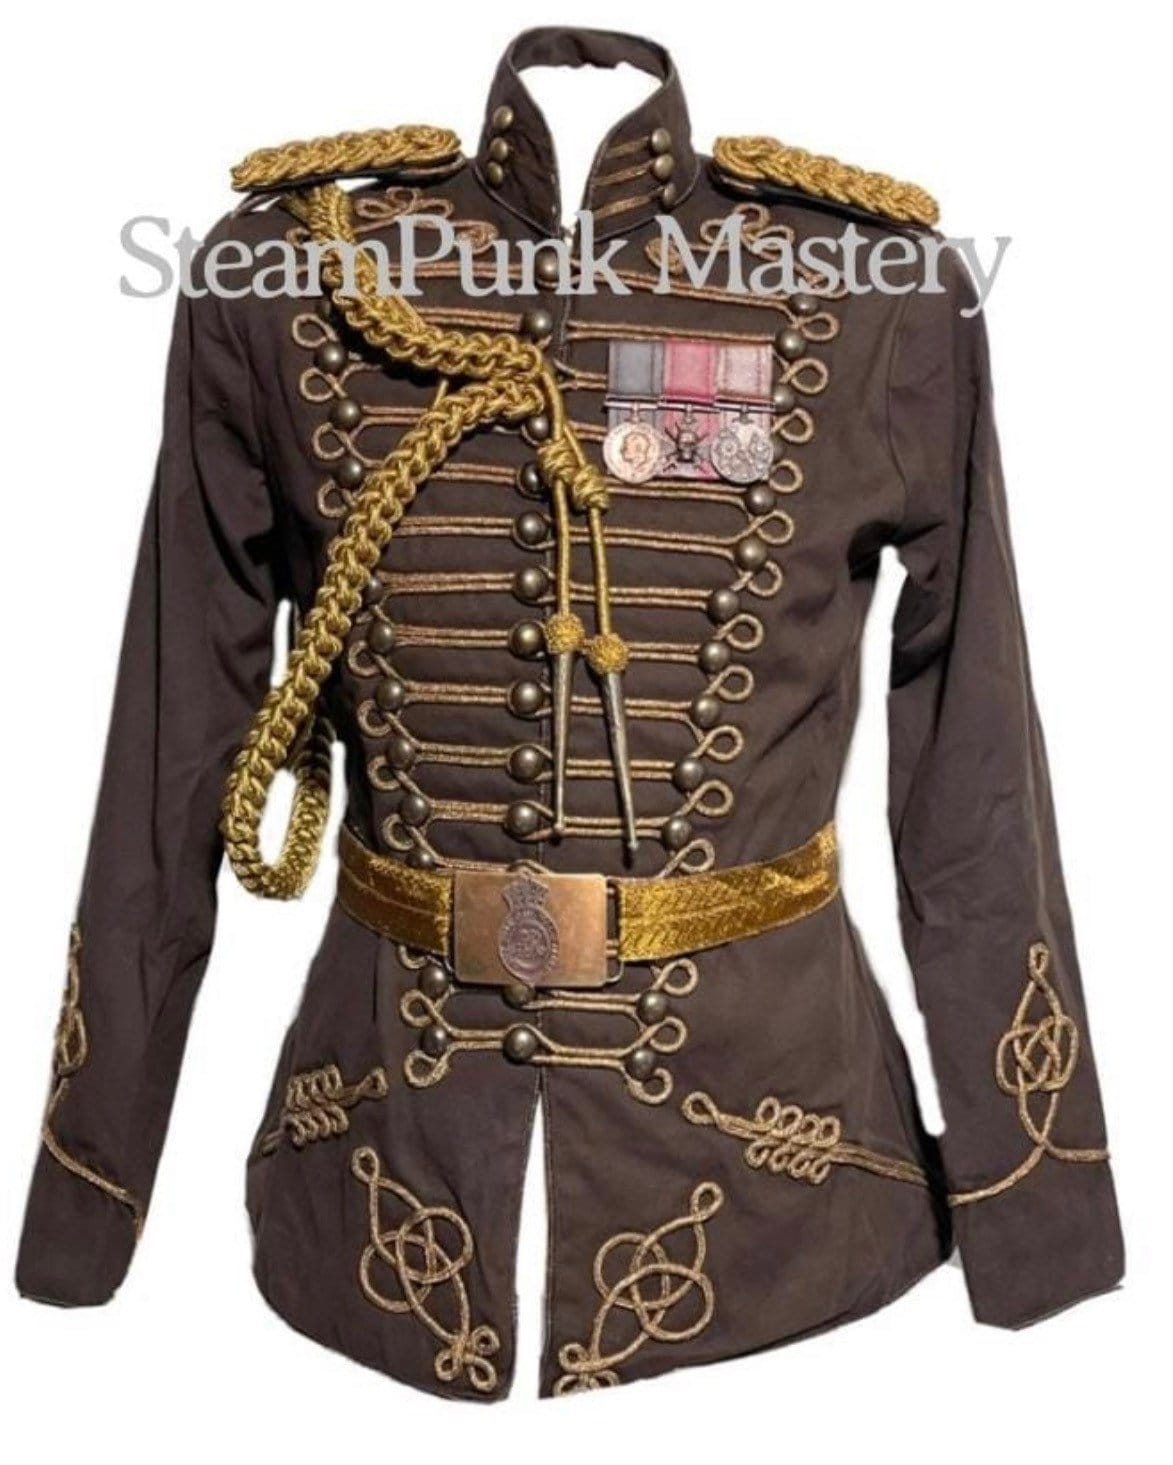 Steampunk 5 Pcs Army Officers Antique Braiding Hussar Jacket With Antique  Look Shoulder Accessories and Belt in Size 38404446 